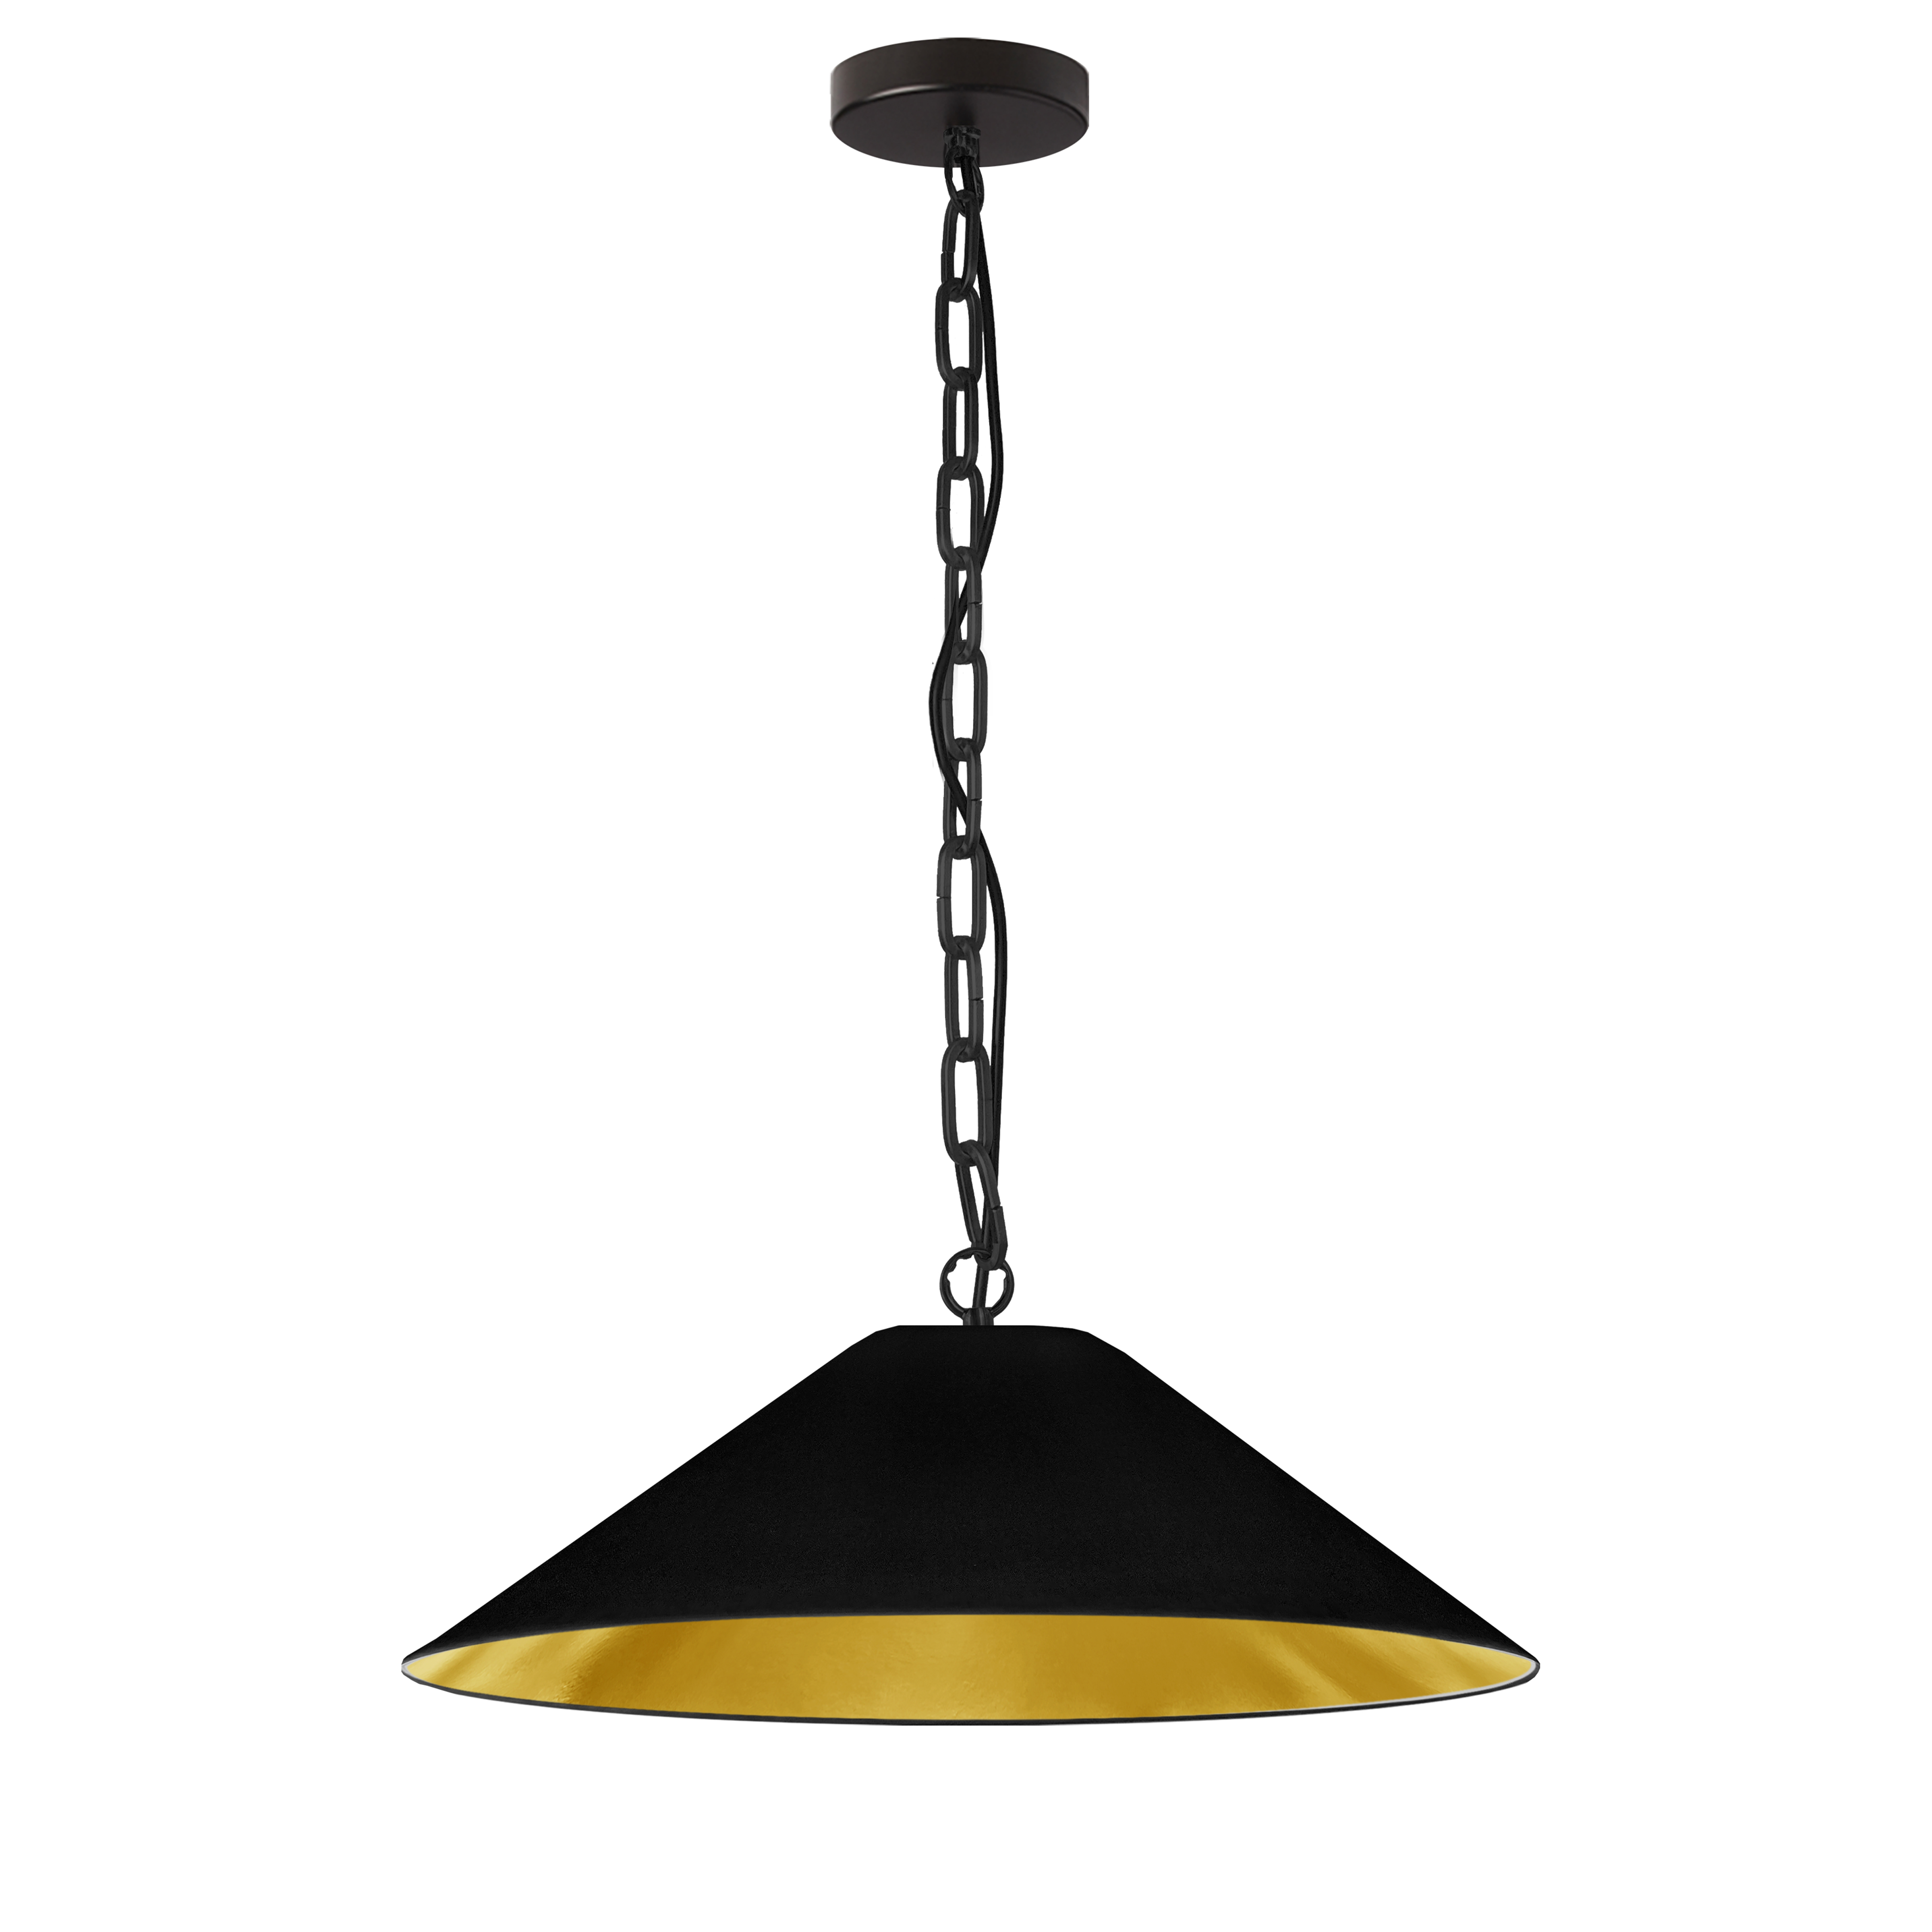 The Presley family of lighting combines a noticeable footprint with a sleek profile that balances its weight. The effect is spacious, and based on a classic profile that will blend into many décor schemes from mid-century to ultra-modern. The chain drop leads to a metal base, discrete inside a broad-angled empire style fabric shade. Color options between the metal finish and both the inner and outer surfaces of the fabric shade range from monochromatic to strikingly contrasting combinations. Presley lighting adds a welcome glow of sophisticated luxury to your kitchen or living room, or a main hallway.